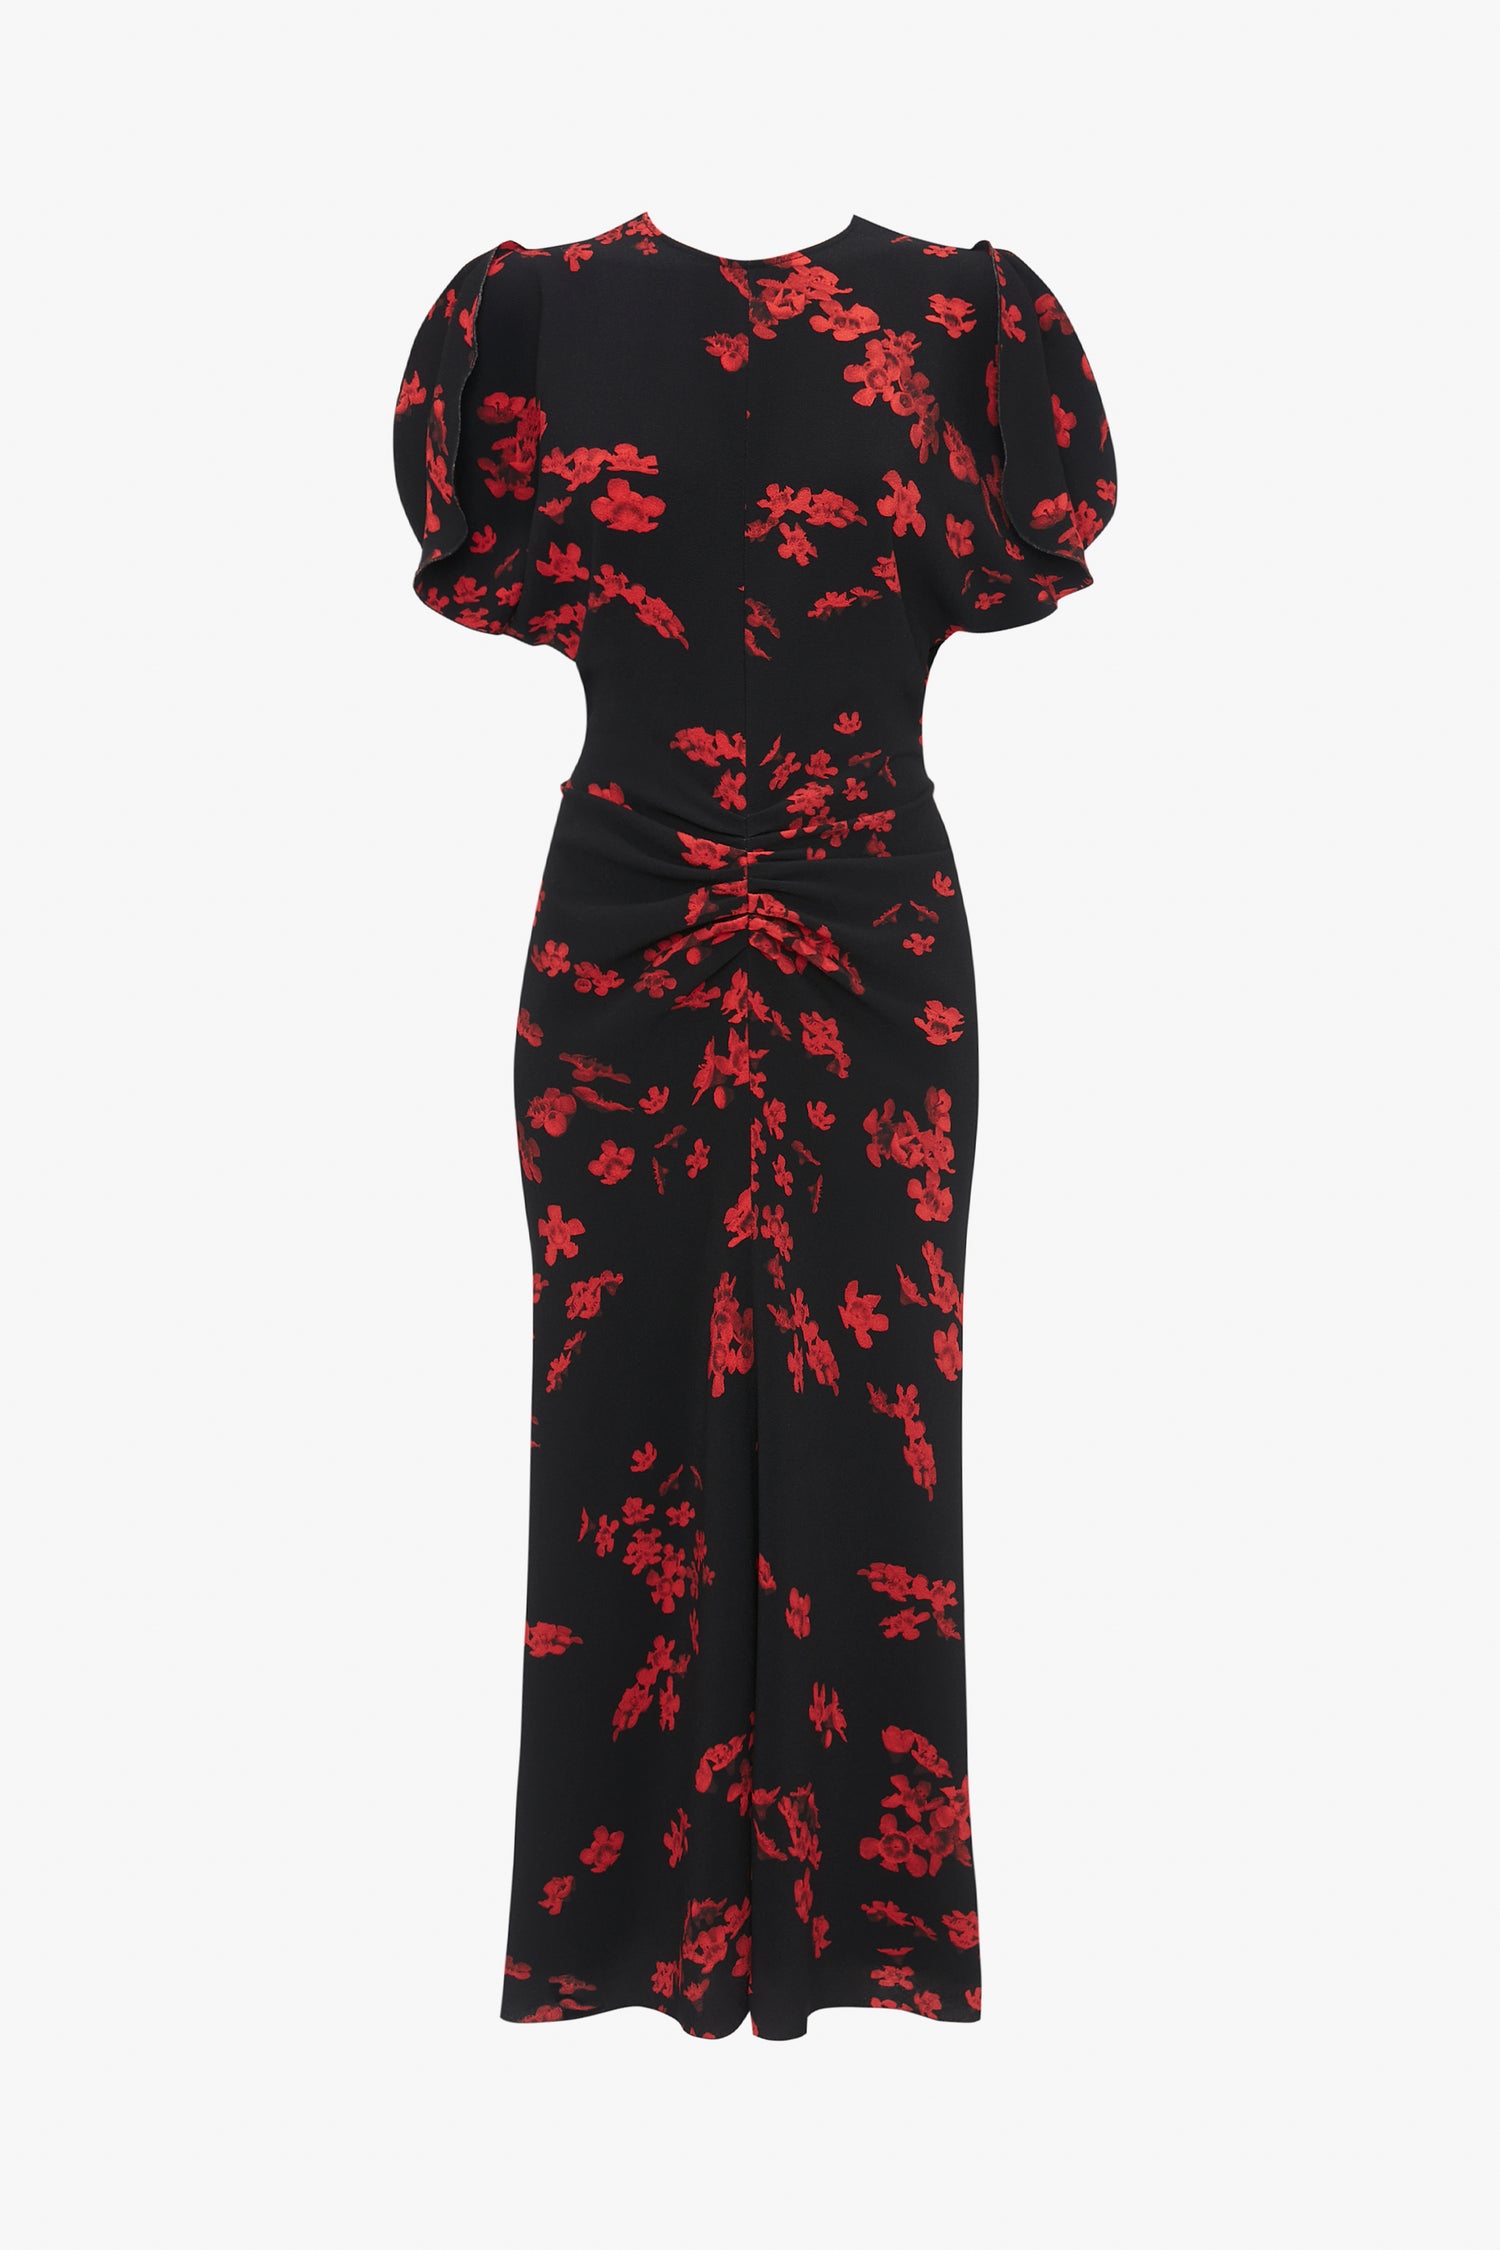 A Gathered Waist Midi Dress In Sci-Fi Black Floral with red floral patterns, featuring short puffed sleeves, a fitted waist with ruching, and a flared skirt for a flattering fit-and-flare silhouette from Victoria Beckham.